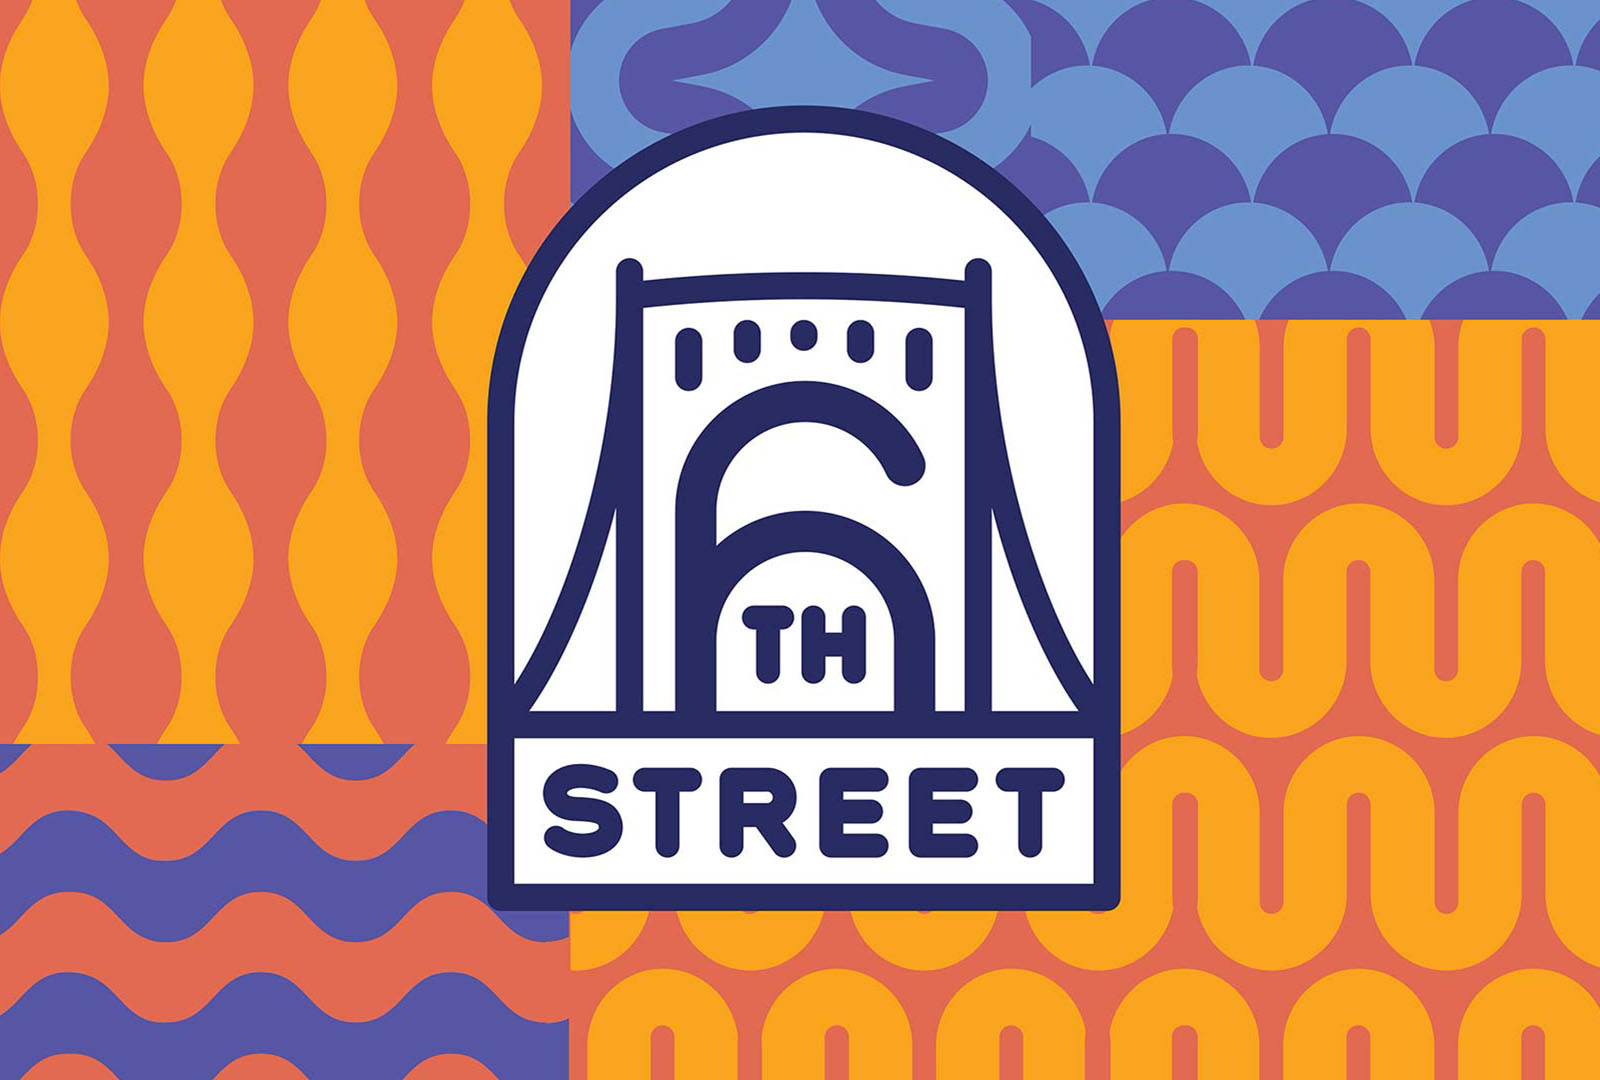 The 6th Street branding for the Pittsburgh Downtown Partnership won a silver ADDY award.